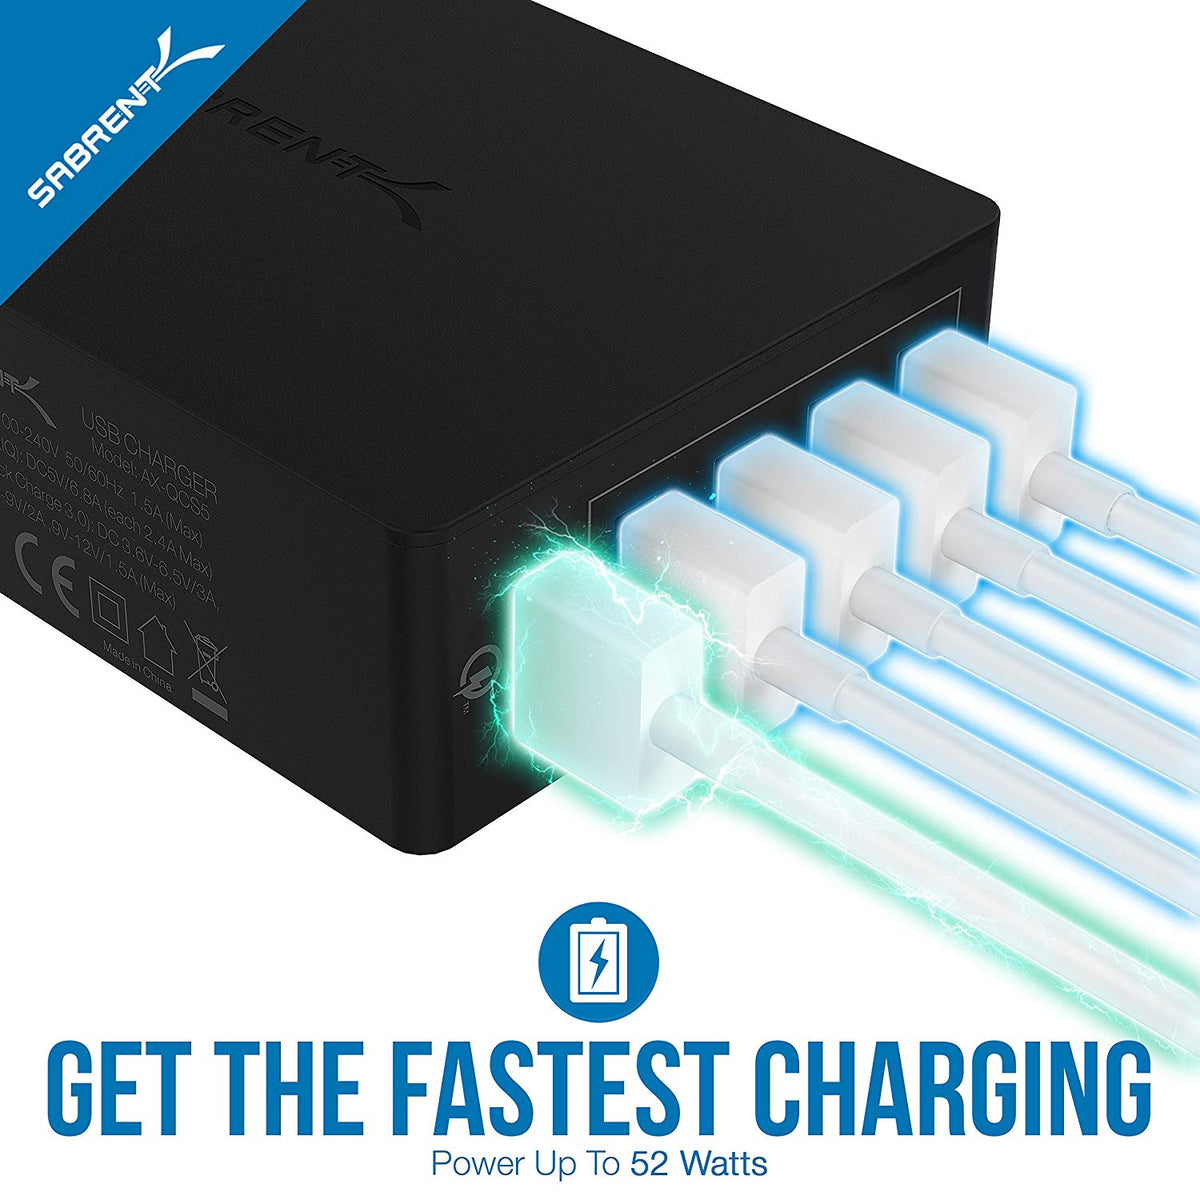 Quick Charge 3.0 [UL Certified] 54W 5-Port Family-Sized Desktop USB Rapid Charger. Smart USB Charger with Auto Detect Technology